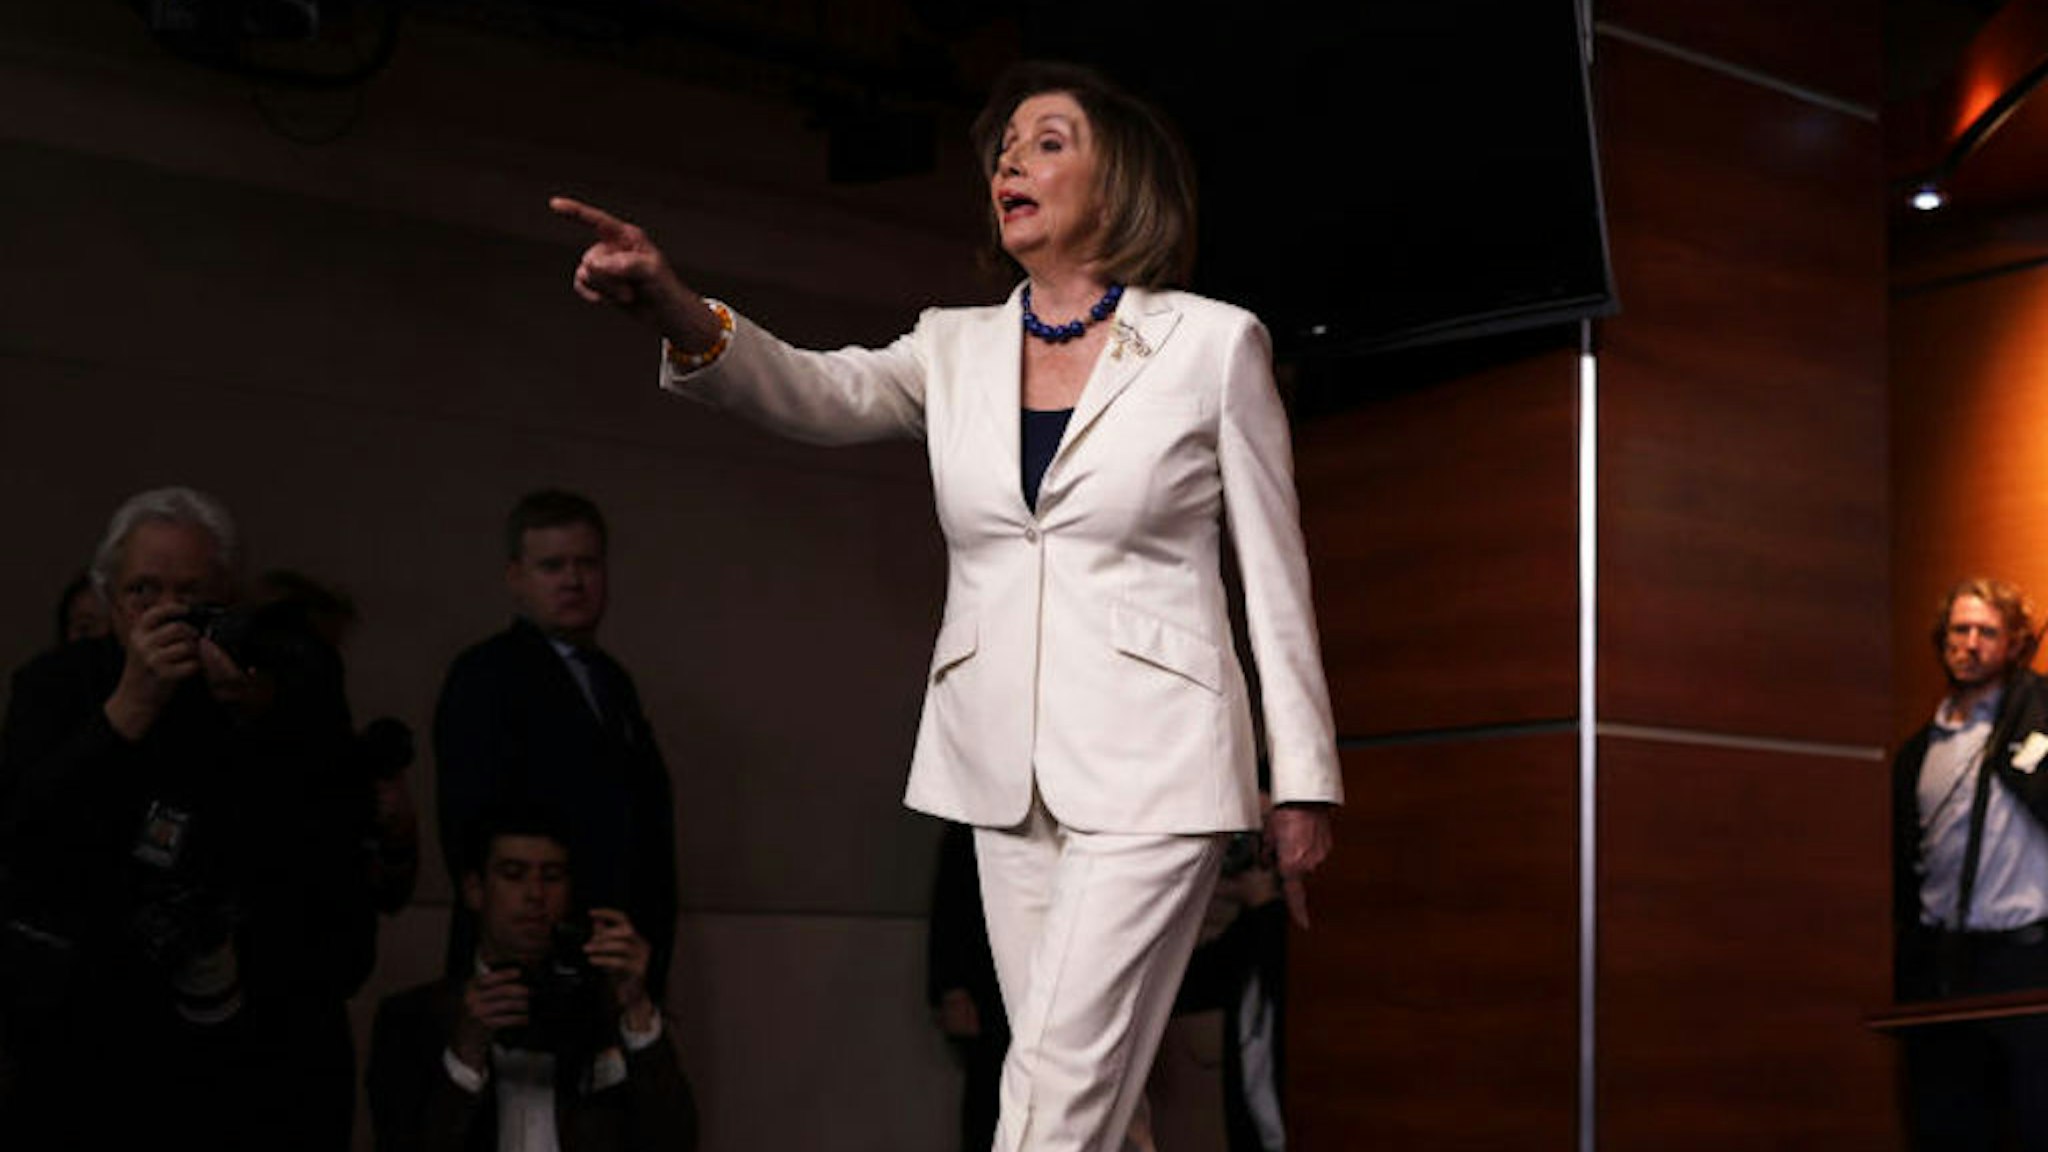 WASHINGTON, DC - DECEMBER 05: U.S. Speaker of the House Rep. Nancy Pelosi (D-CA) reacts to a reporter‚Äôs question about whether she hates President Donald Trump during her weekly news conference December 5, 2019 on Capitol Hill in Washington, DC. Speaker Pelosi discussed the impeachment inquiry against President Donald Trump.